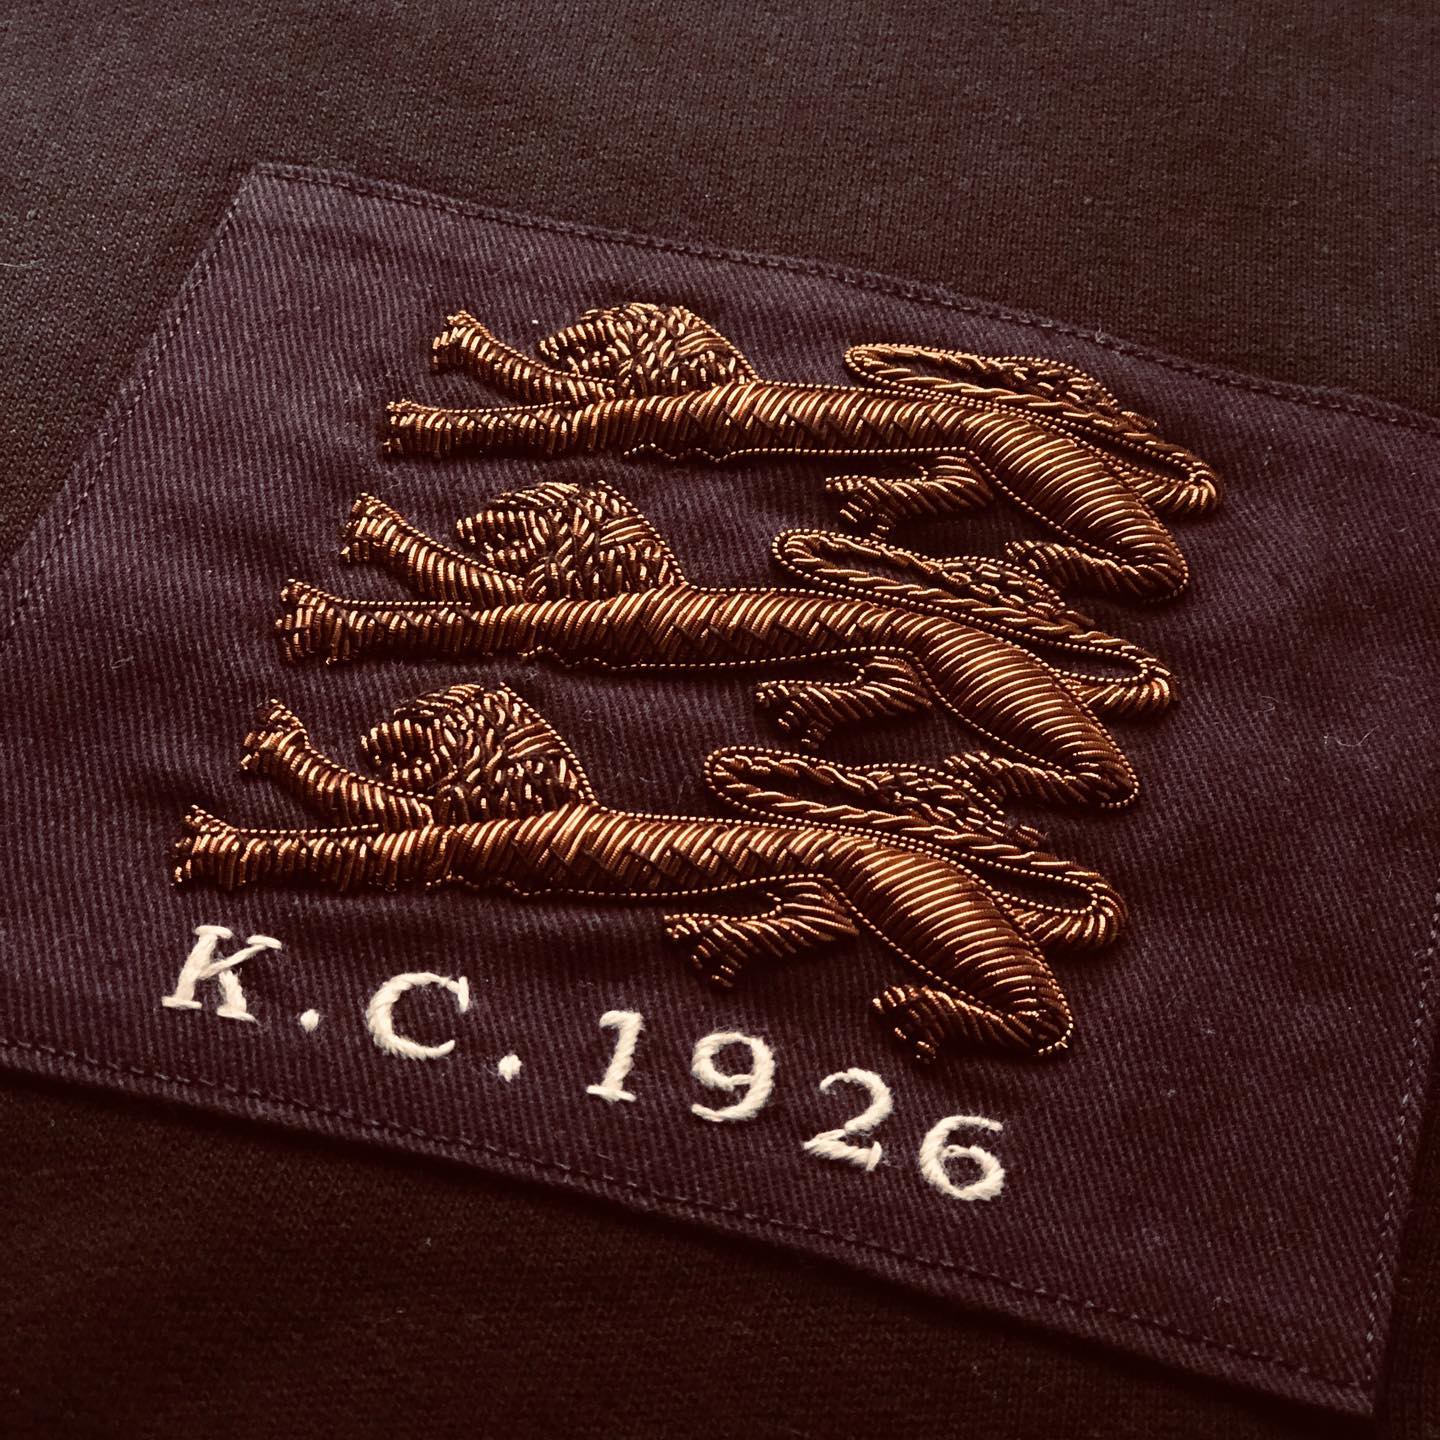 Three lions, our historic emblem in bullion metal thread featured on a reissue of our vintage wash black sweatshirt.